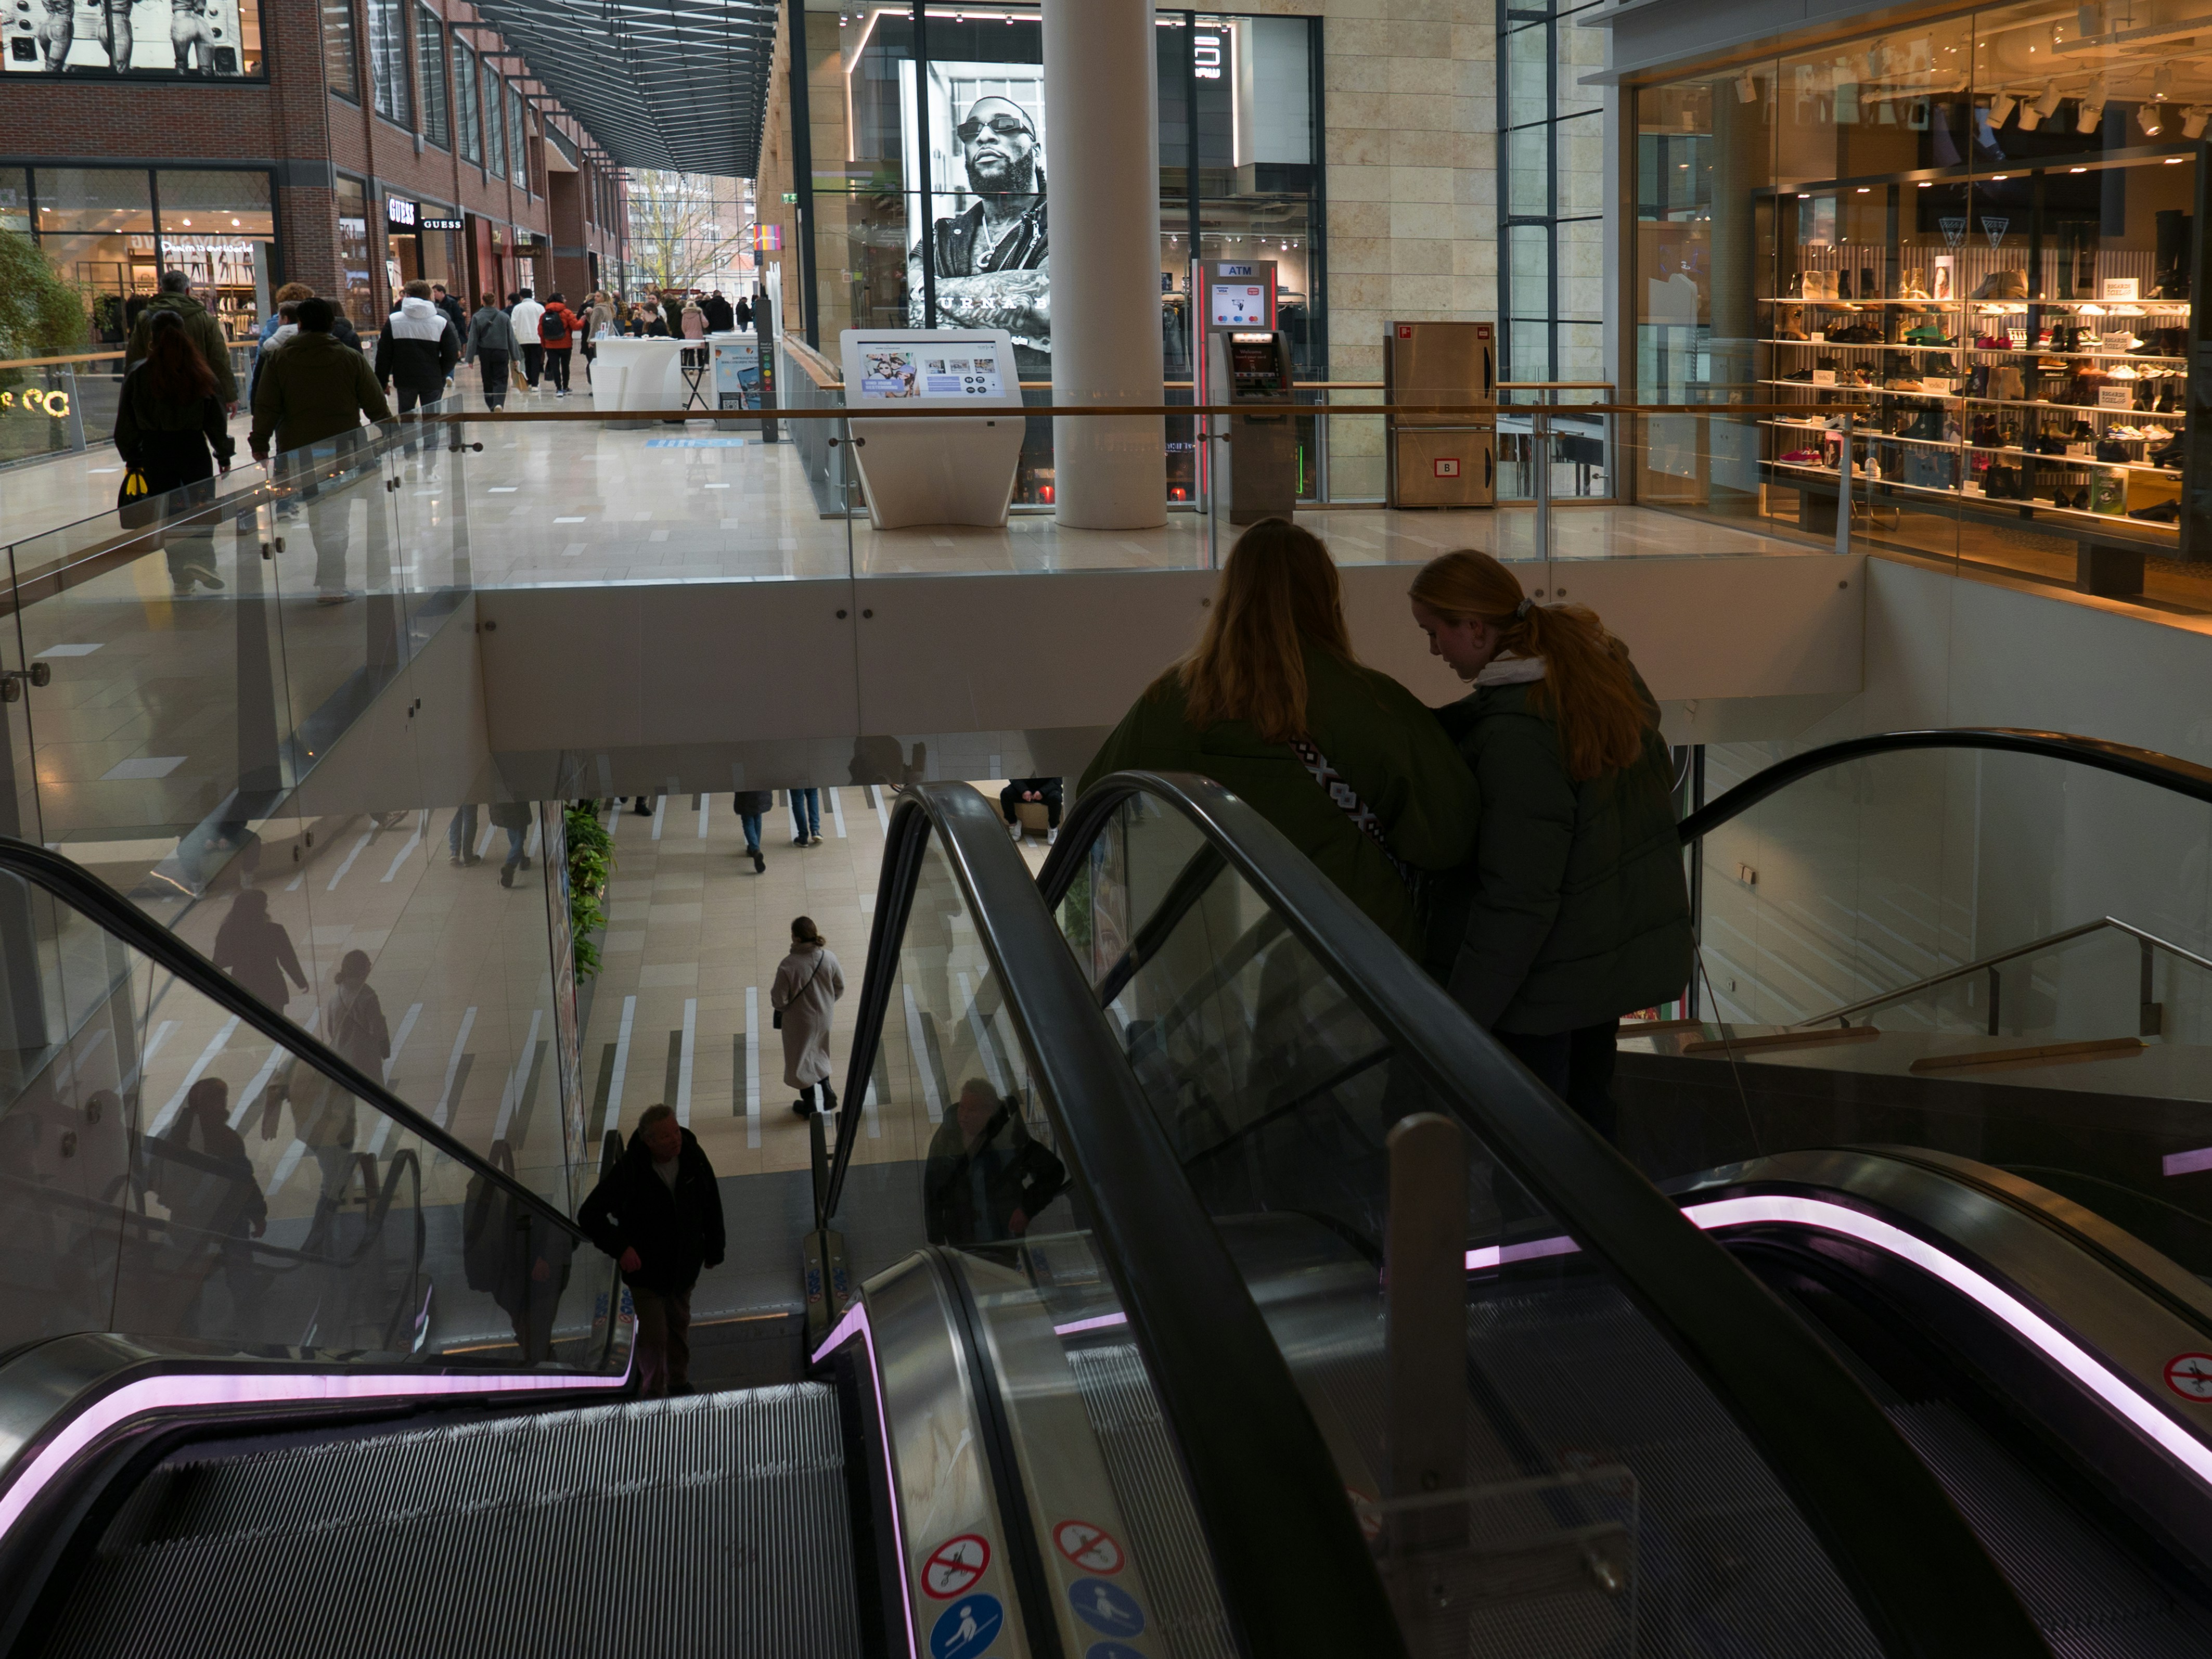 Young women on the escaloator in the modern shopping mall Hoog Catharijne, in Utrecht city - The Netherlands. This modern architecture had a clear interior light and a lot of transparency. . Street photography in Utrecht, The Netherlands by Fons Heijnsbroek; free download photo. This urban image is shared by me as free photo in suitable resolutions for making a good art print or wallpaper.